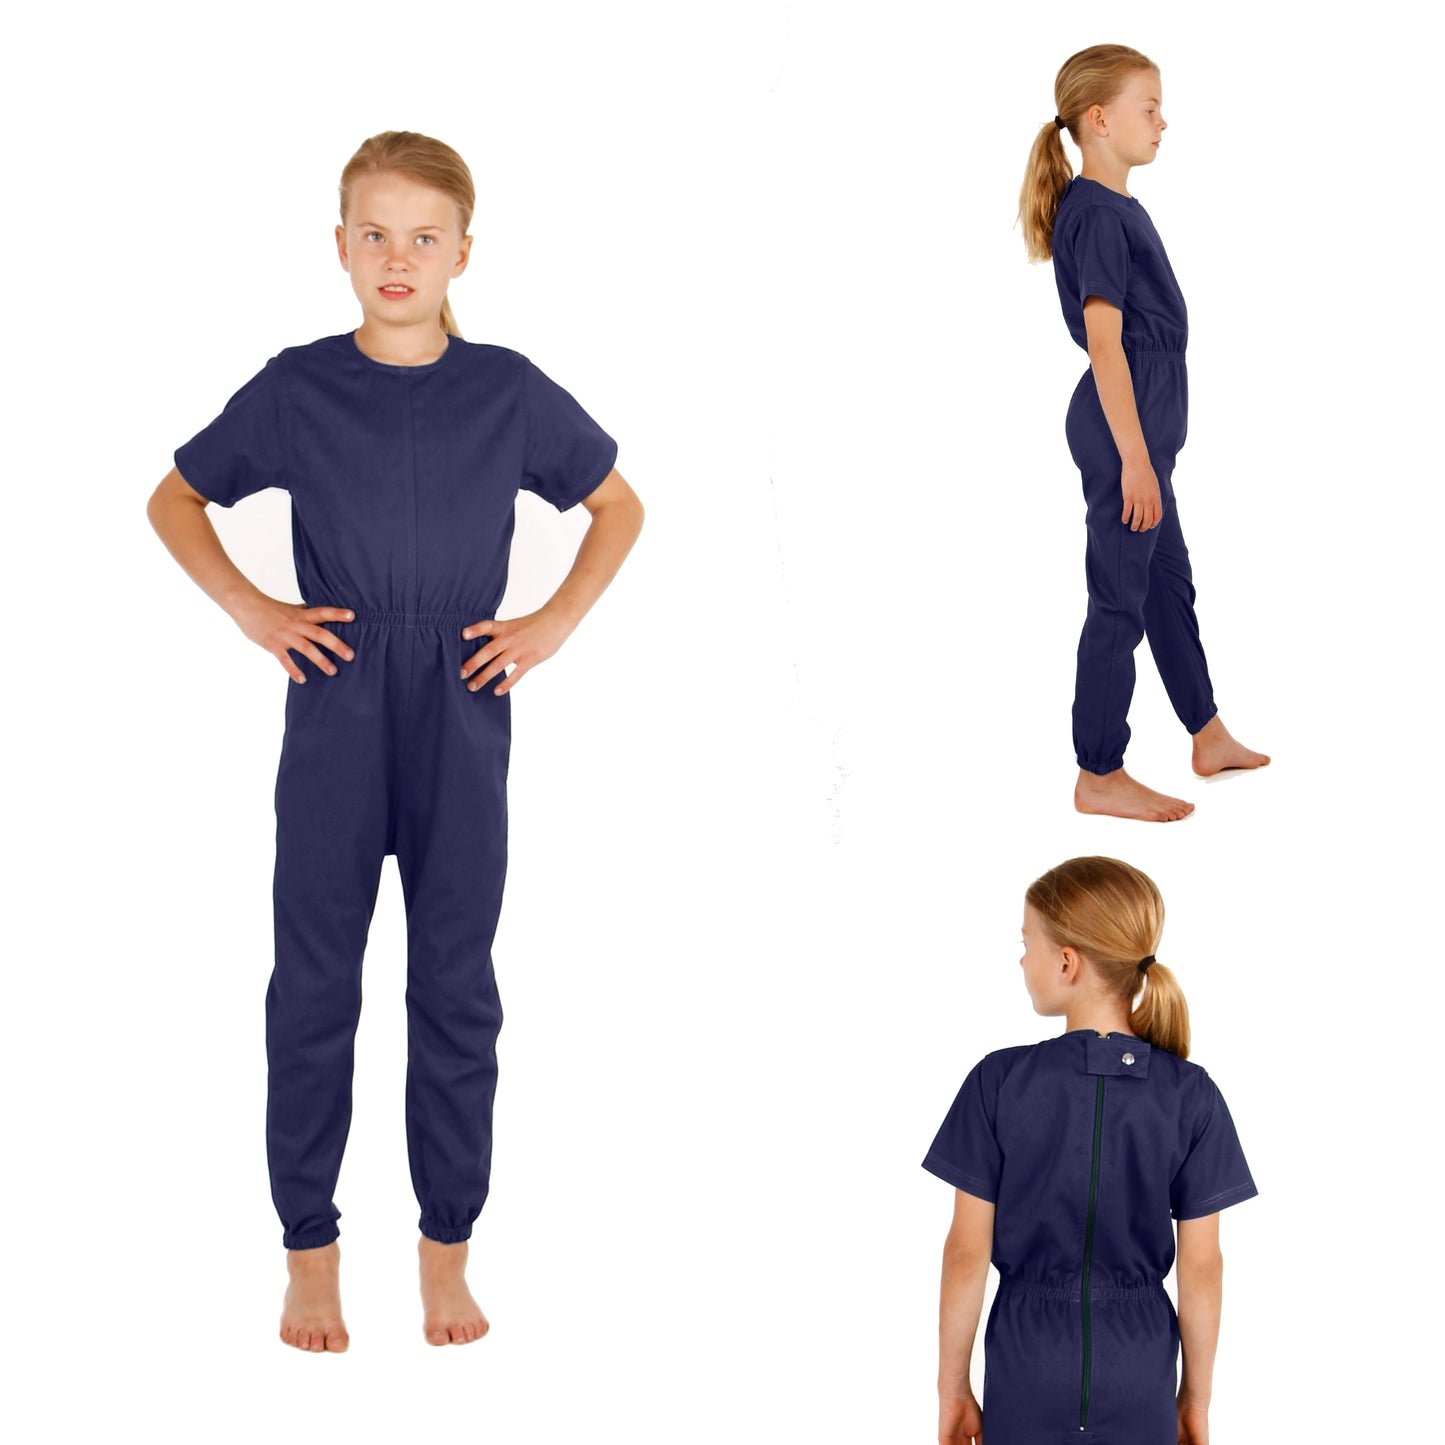 Children's High Durability/Rip resistant Bodysuit With Zip Up The Back-Ring Close (4022)